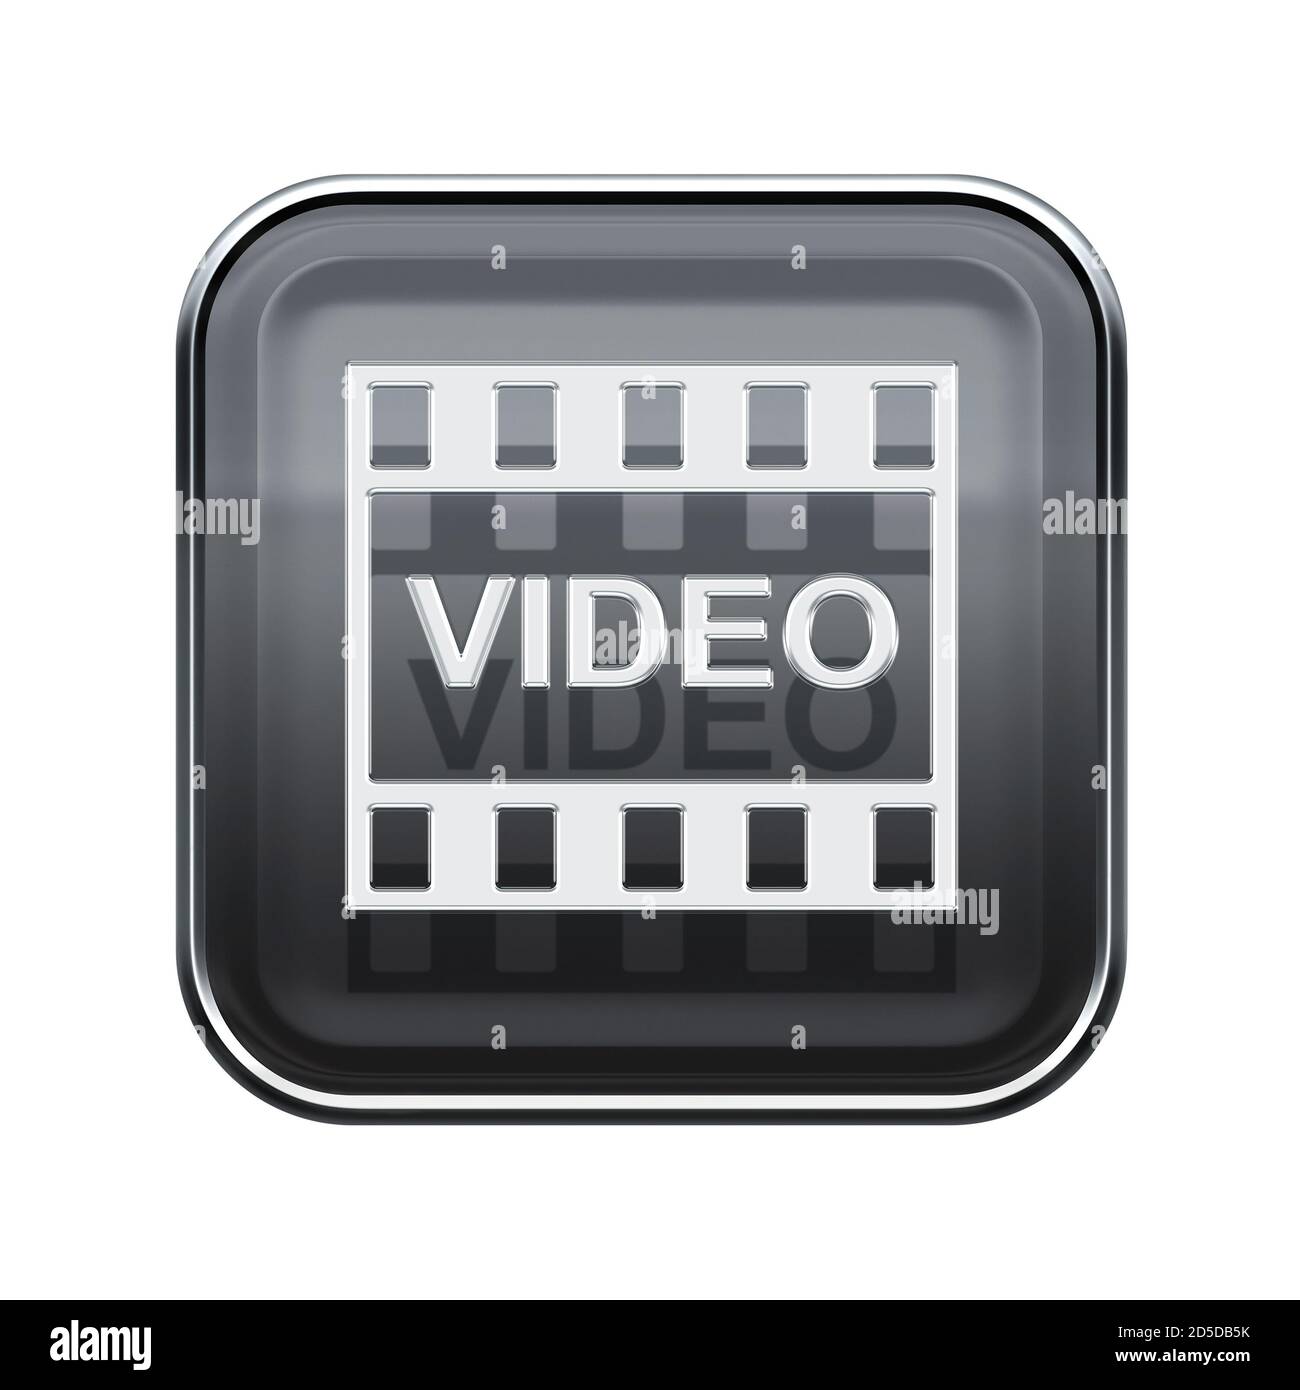 Video icon glossy grey, isolated on white background Stock Photo